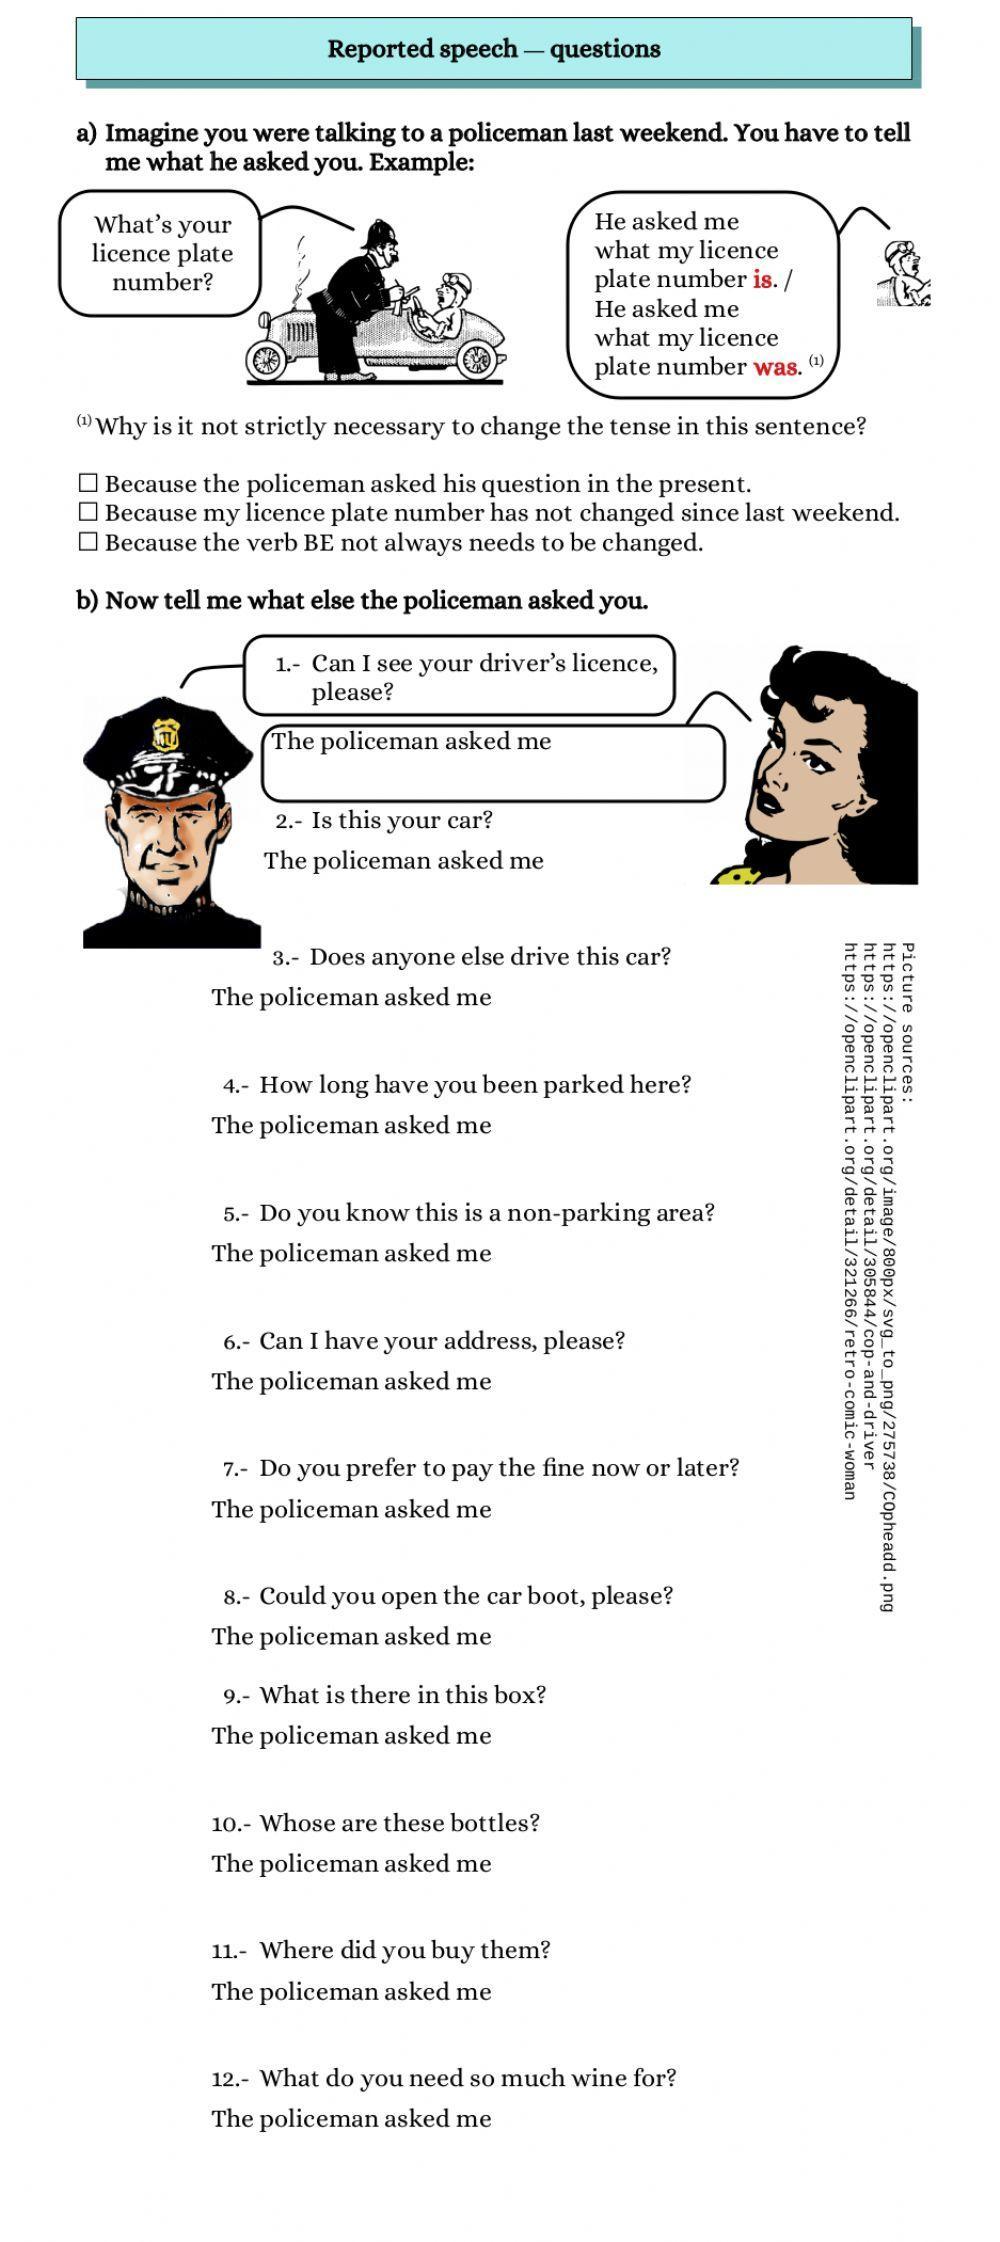 Reported speech questions - policeman's questions